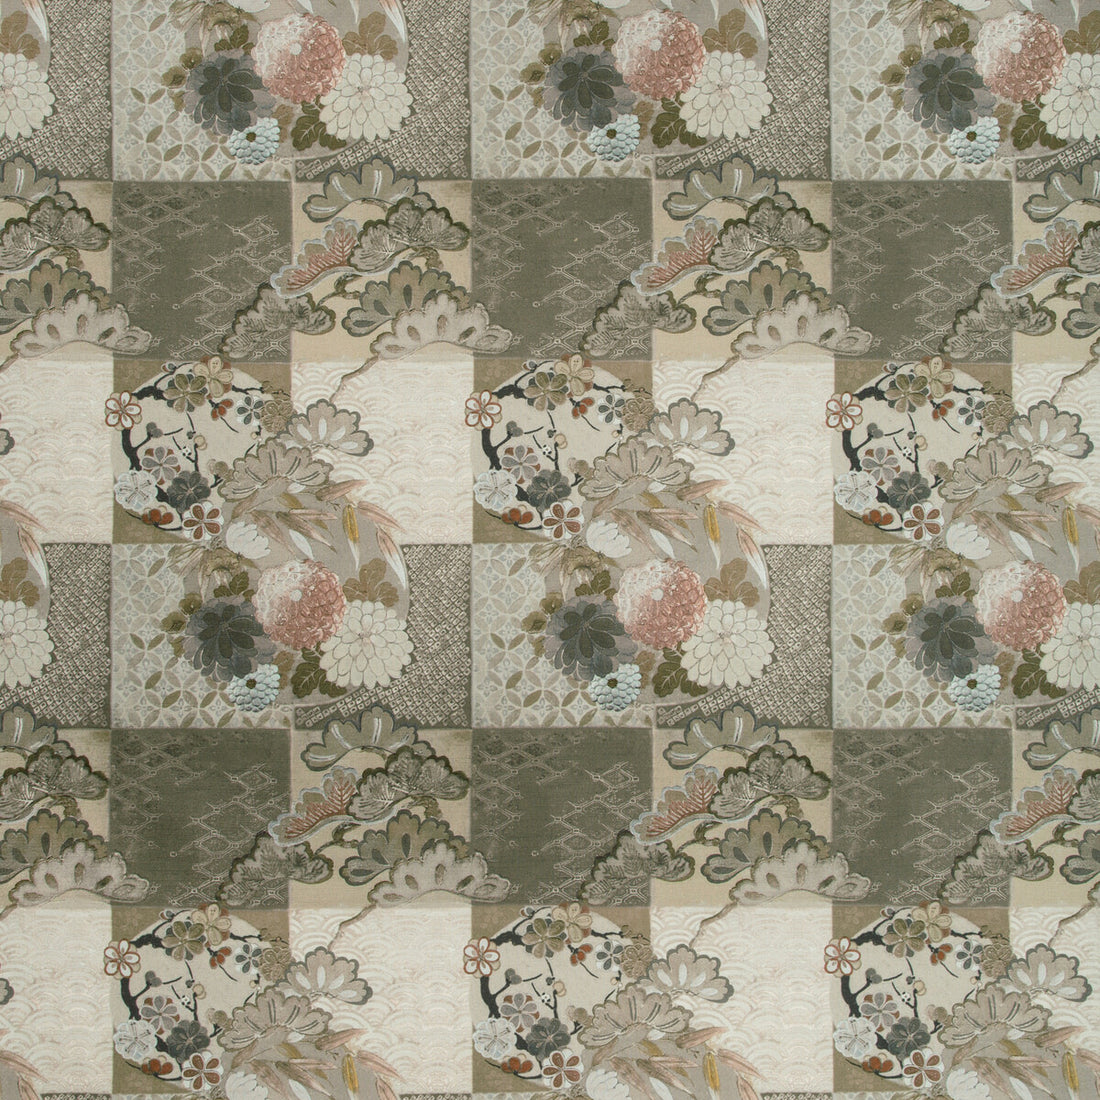 Osode fabric in stone/blush color - pattern 35439.1711.0 - by Kravet Couture in the Izu Collection collection